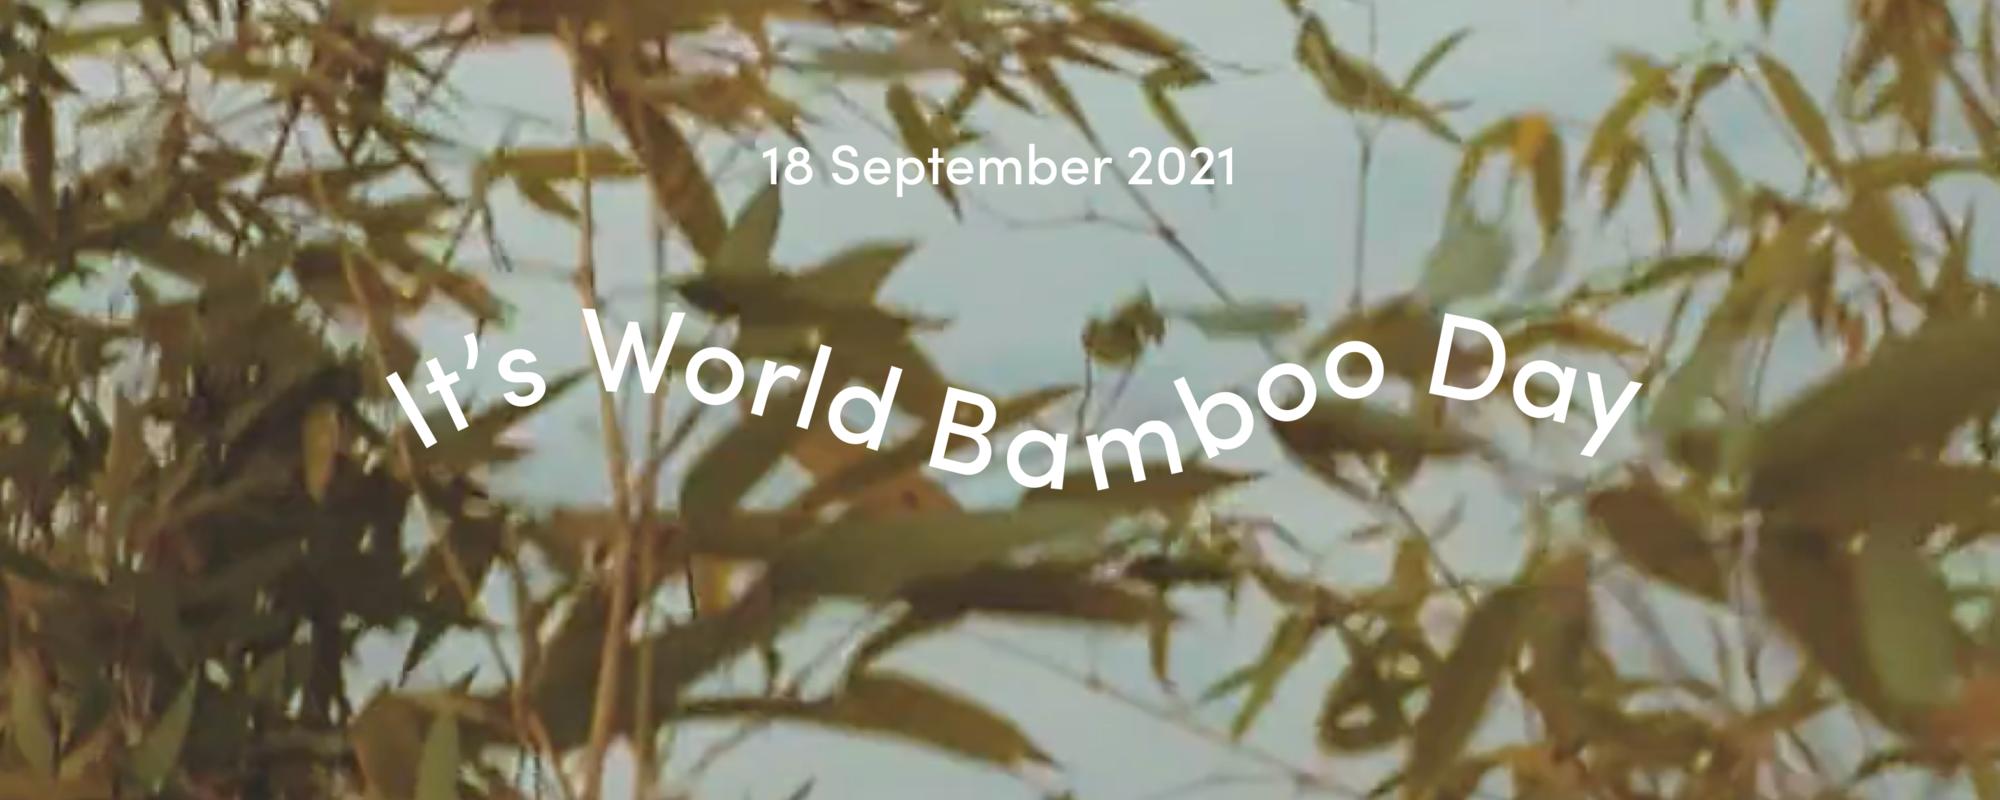 World Bamboo Day 2021 | 10 facts about bamboo and why it's a better choice for you and the planet.